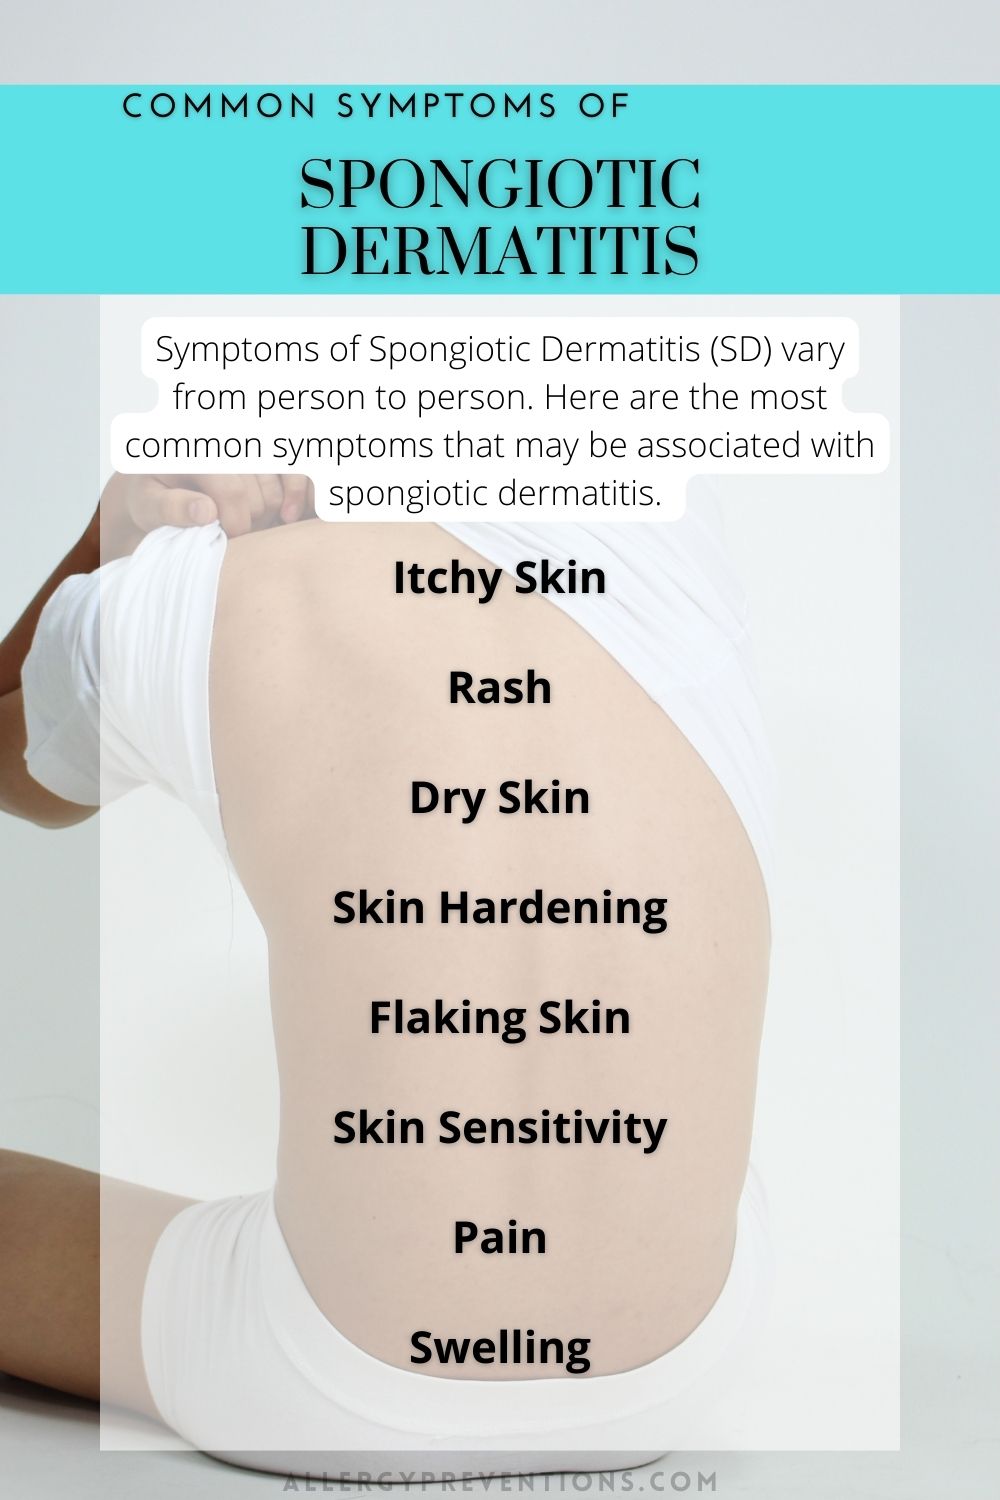 Common symptoms of Spongiotic Dermatitis infographic. Man holding up the back of his shirt with the following information. Symptoms of Spongiotic Dermatitis (SD) vary from person to person. Here are the most common symptoms that may be associated with spongiotic dermatitis. Itchy Skin Rash Dry Skin Skin Hardening Flaking Skin Skin Sensitivity Pain Swelling